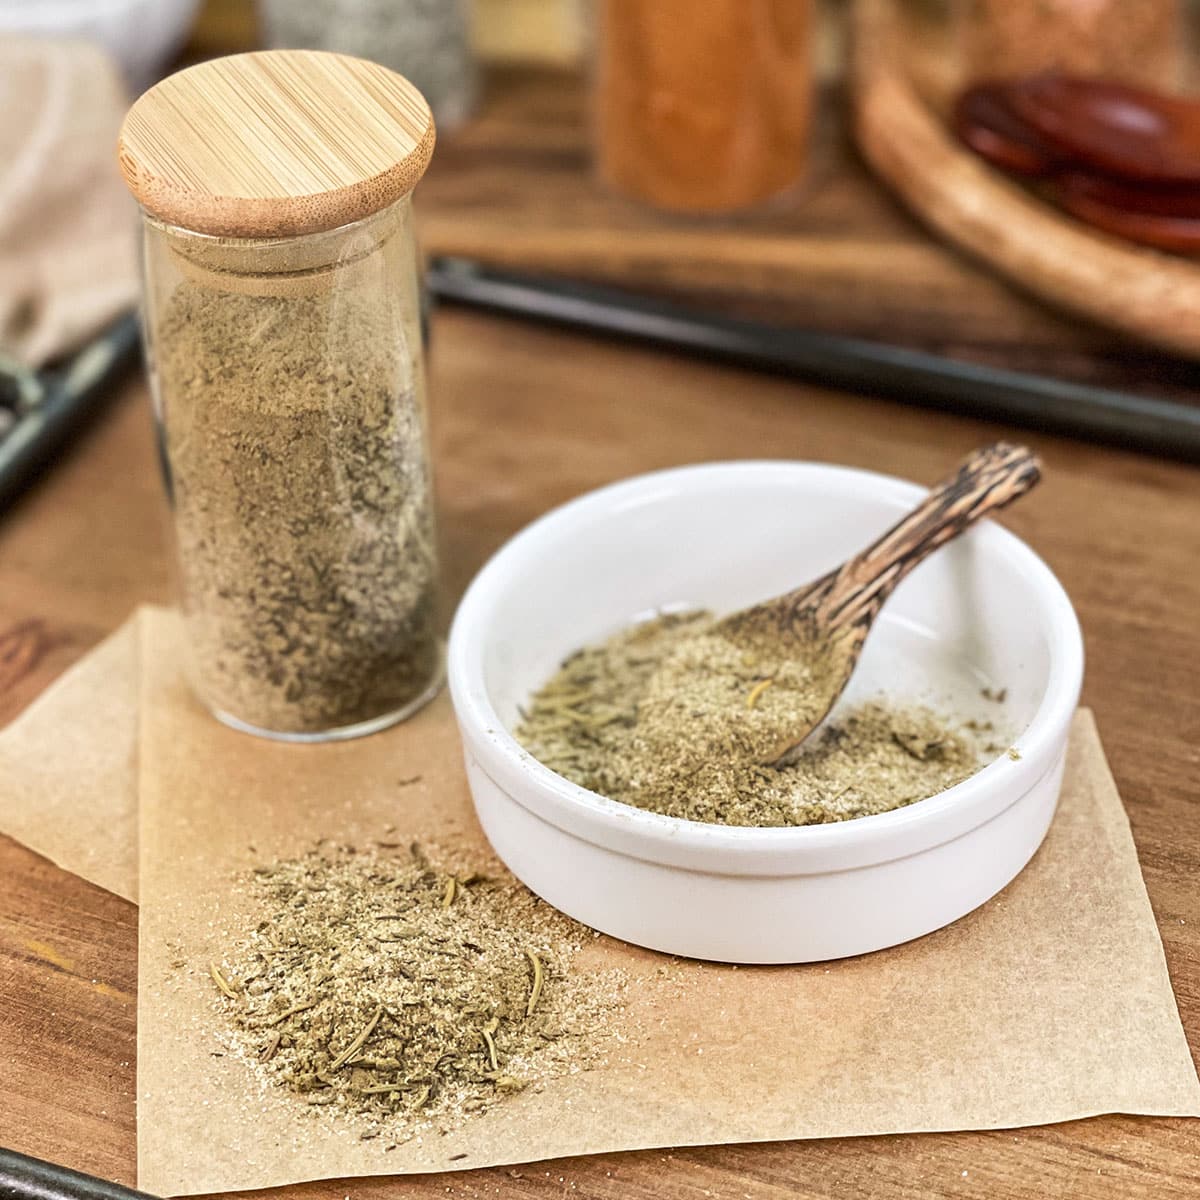 Turkey seasoning blend in glass jar, in dish with spoon, and spilled on parchment paper.